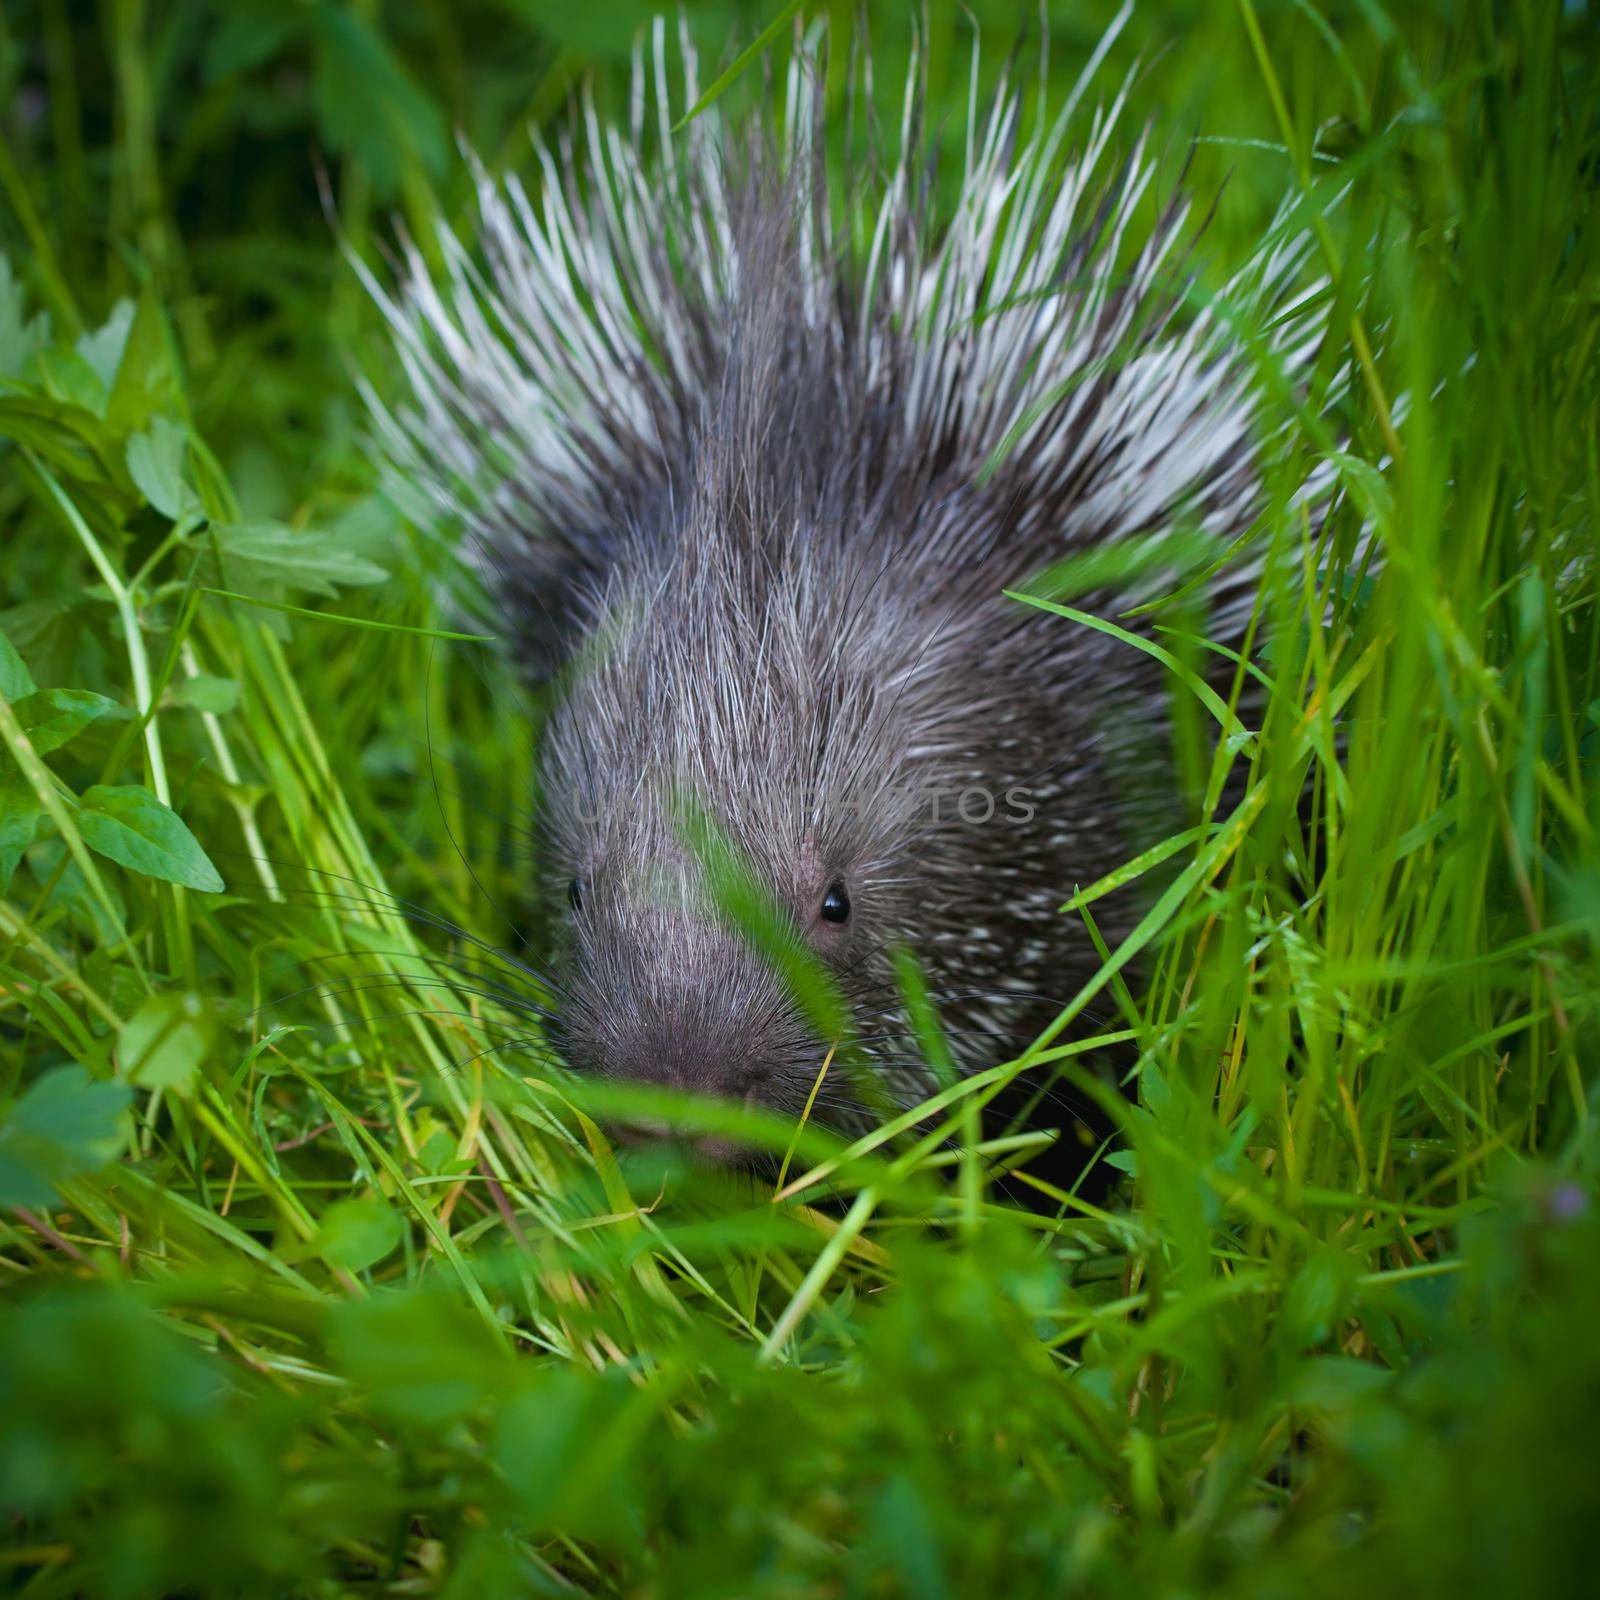 Indian crested Porcupine baby, Hystrix indica, on grass